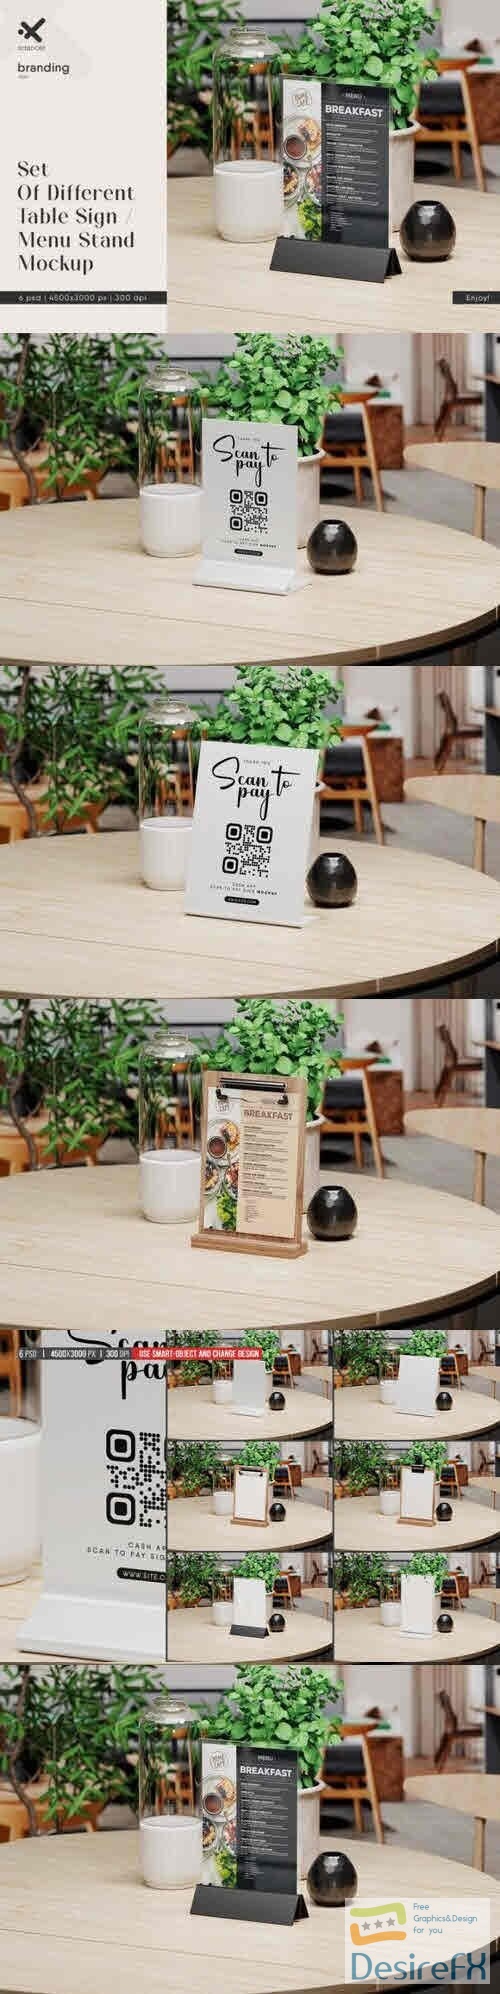 Set Of Different Table Sign / Menu Stand Mockup - 2352490